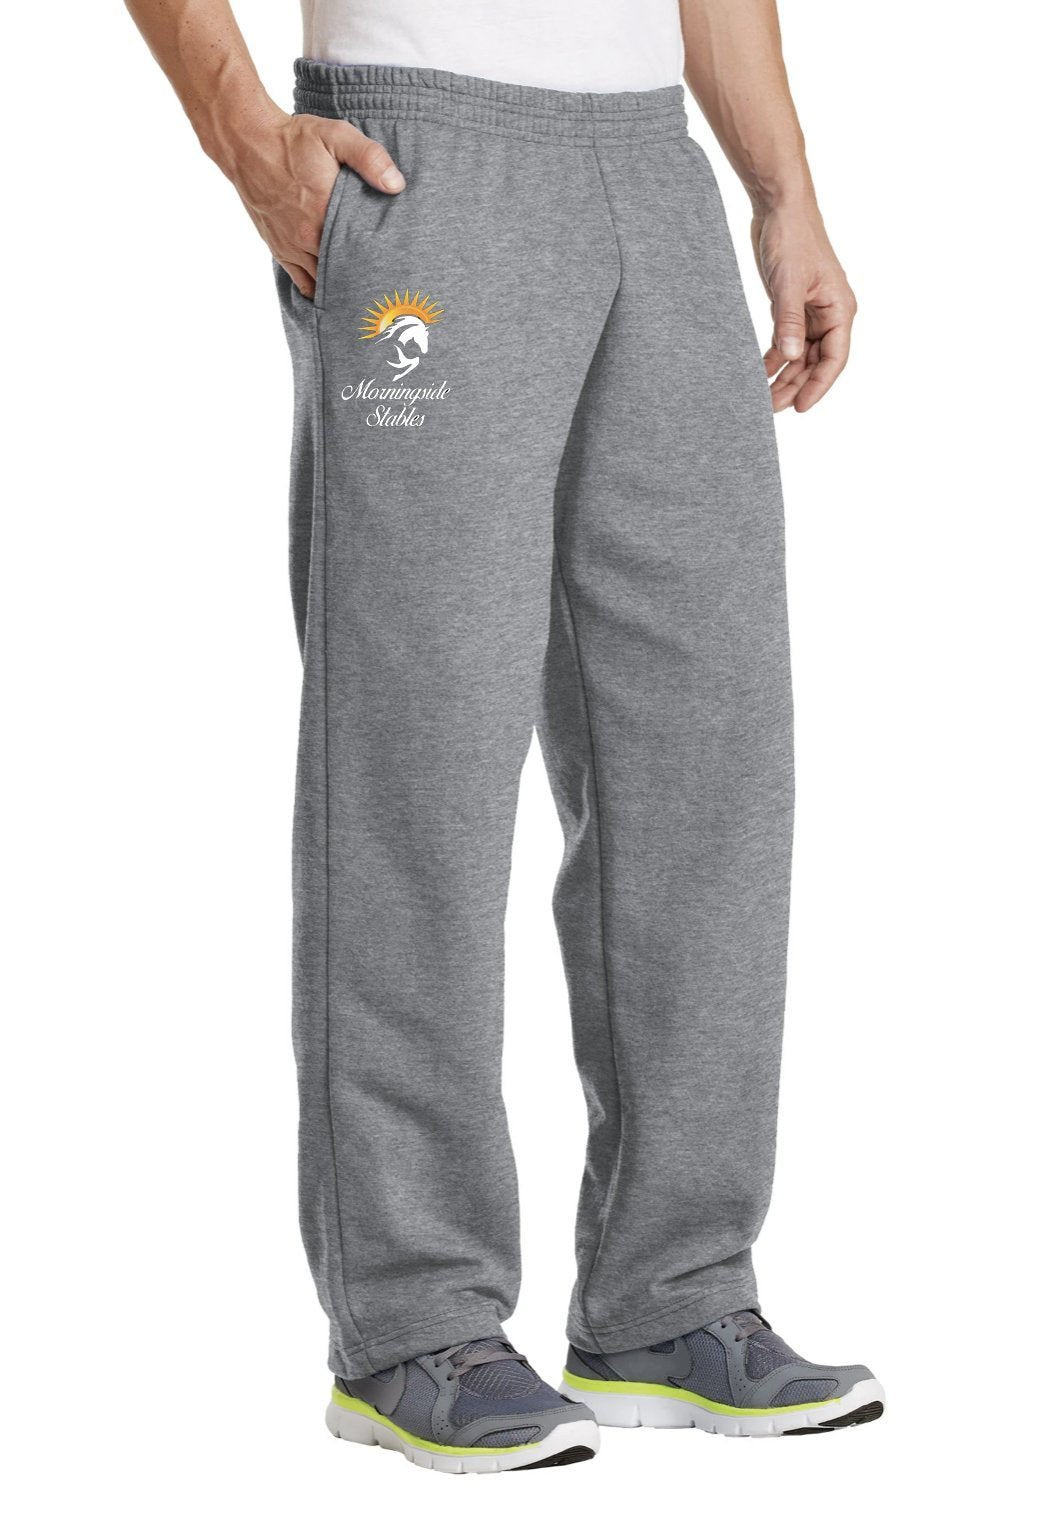 Morningside Stables Core Fleece Sweatpant with Pockets (Unisex)